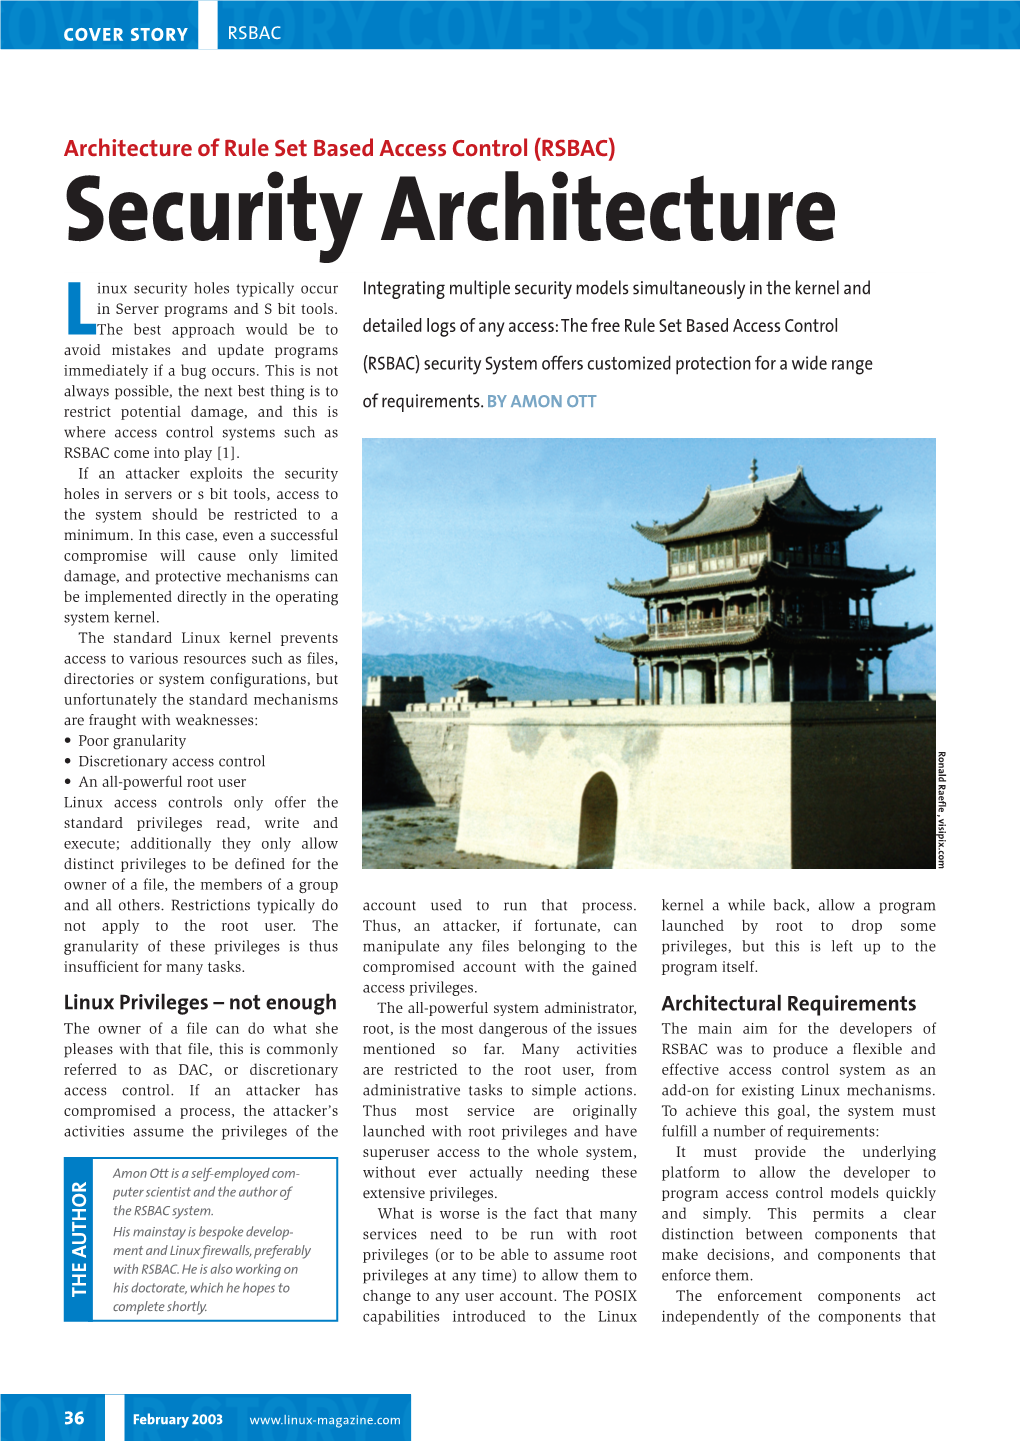 Security Architecture